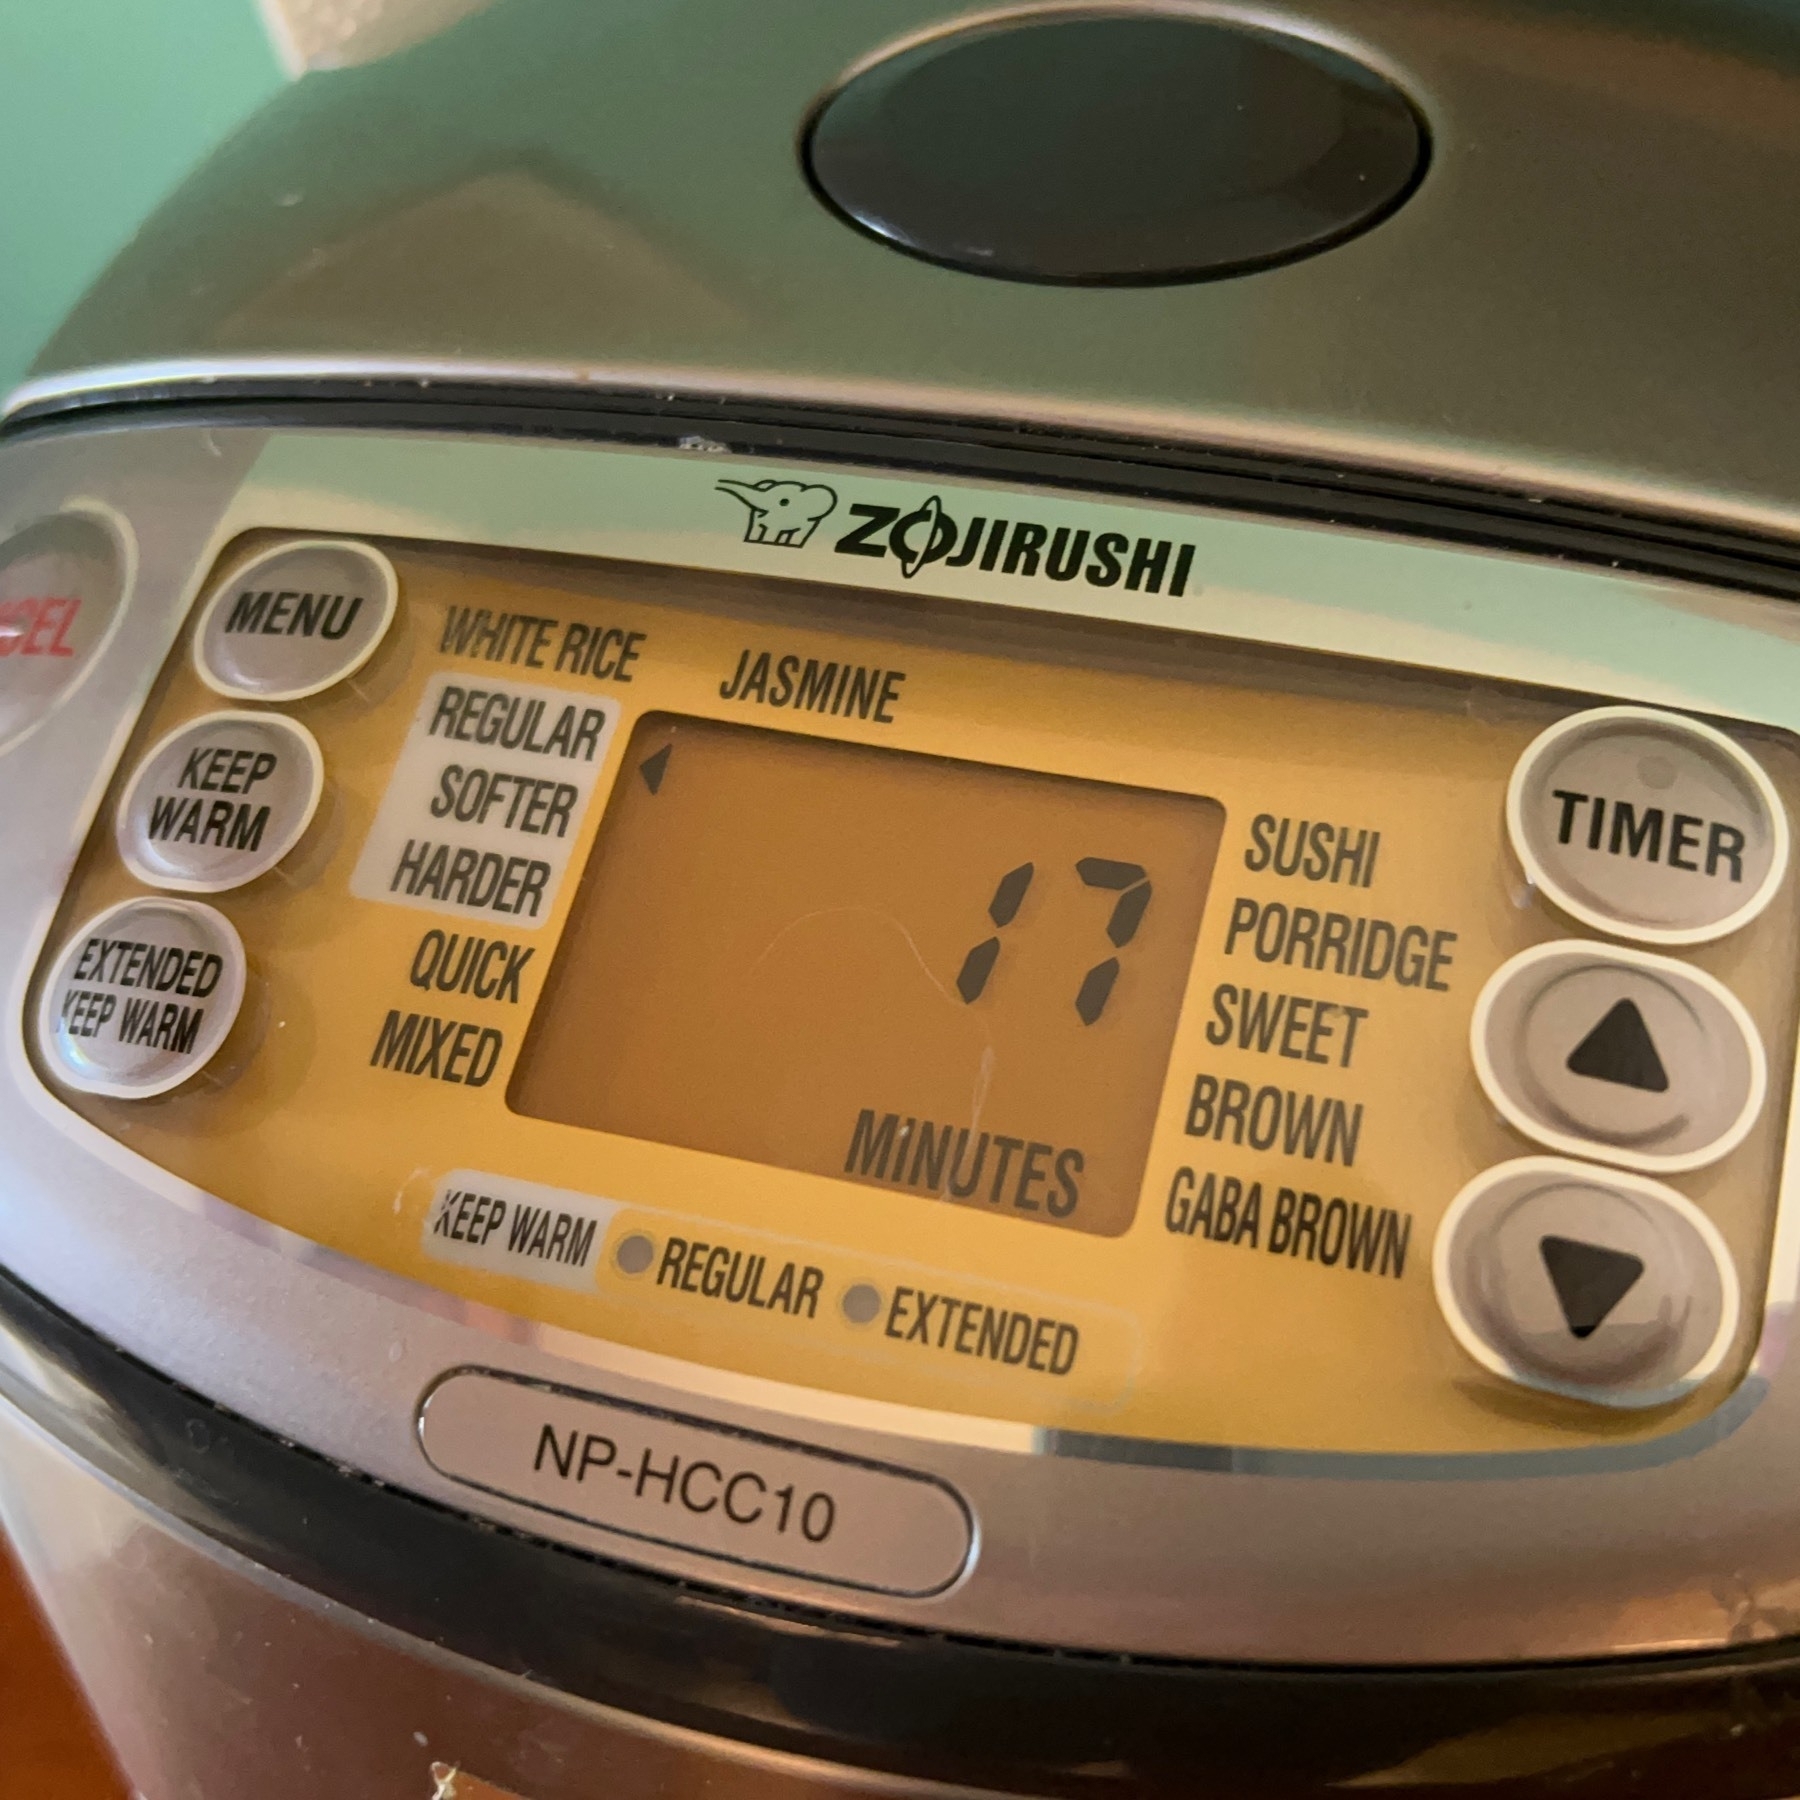 The orange screen of a rice cooker with 17 minutes of remaining time.